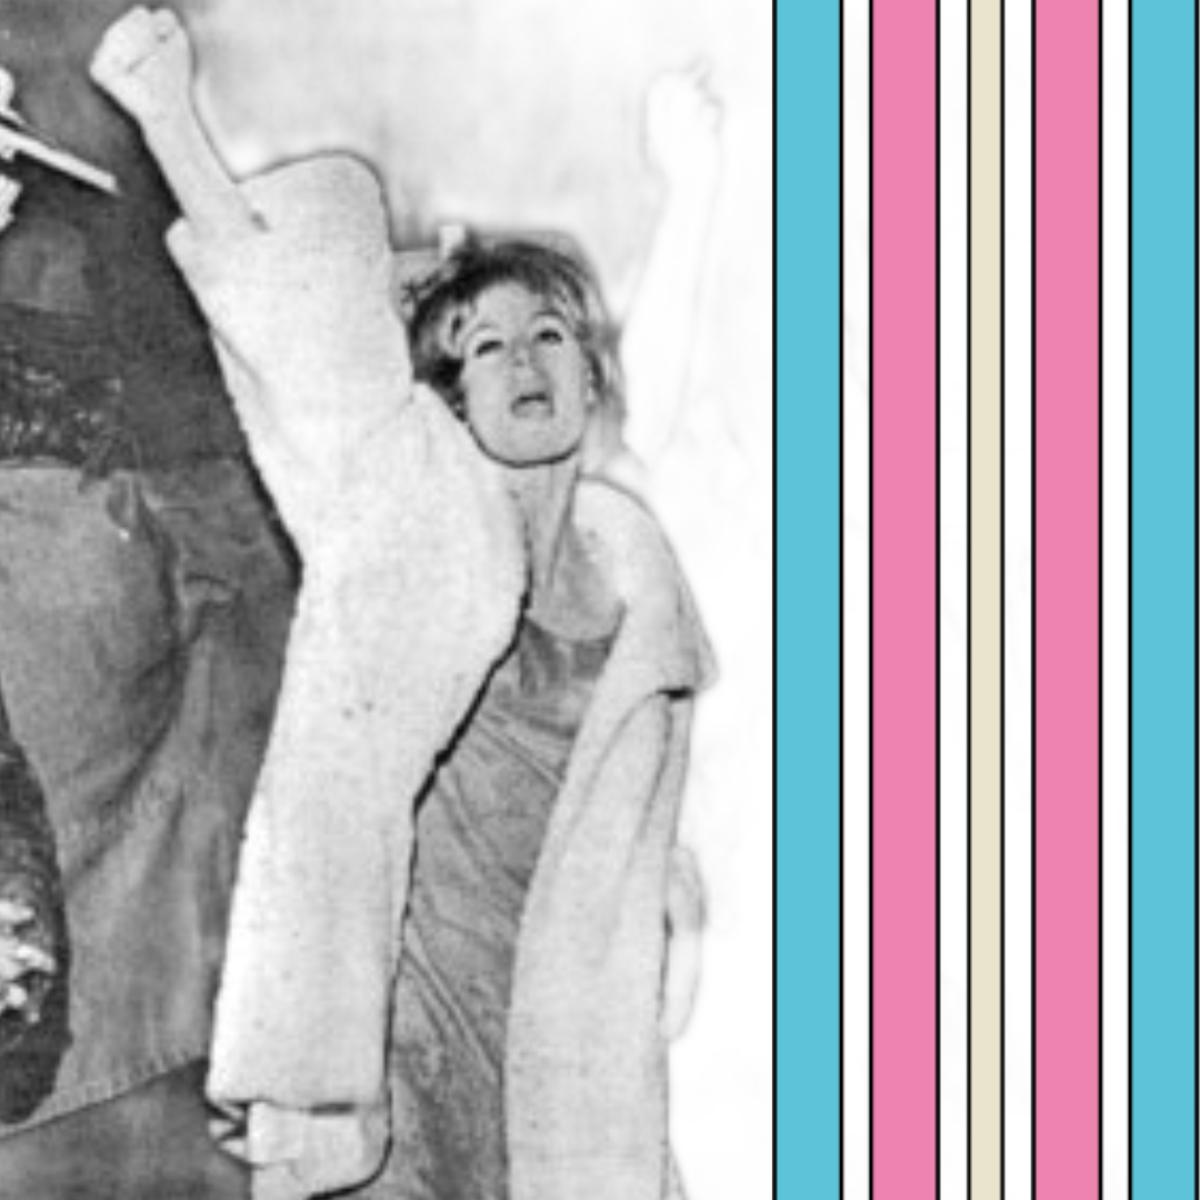 Screaming Queens: representations of trans history